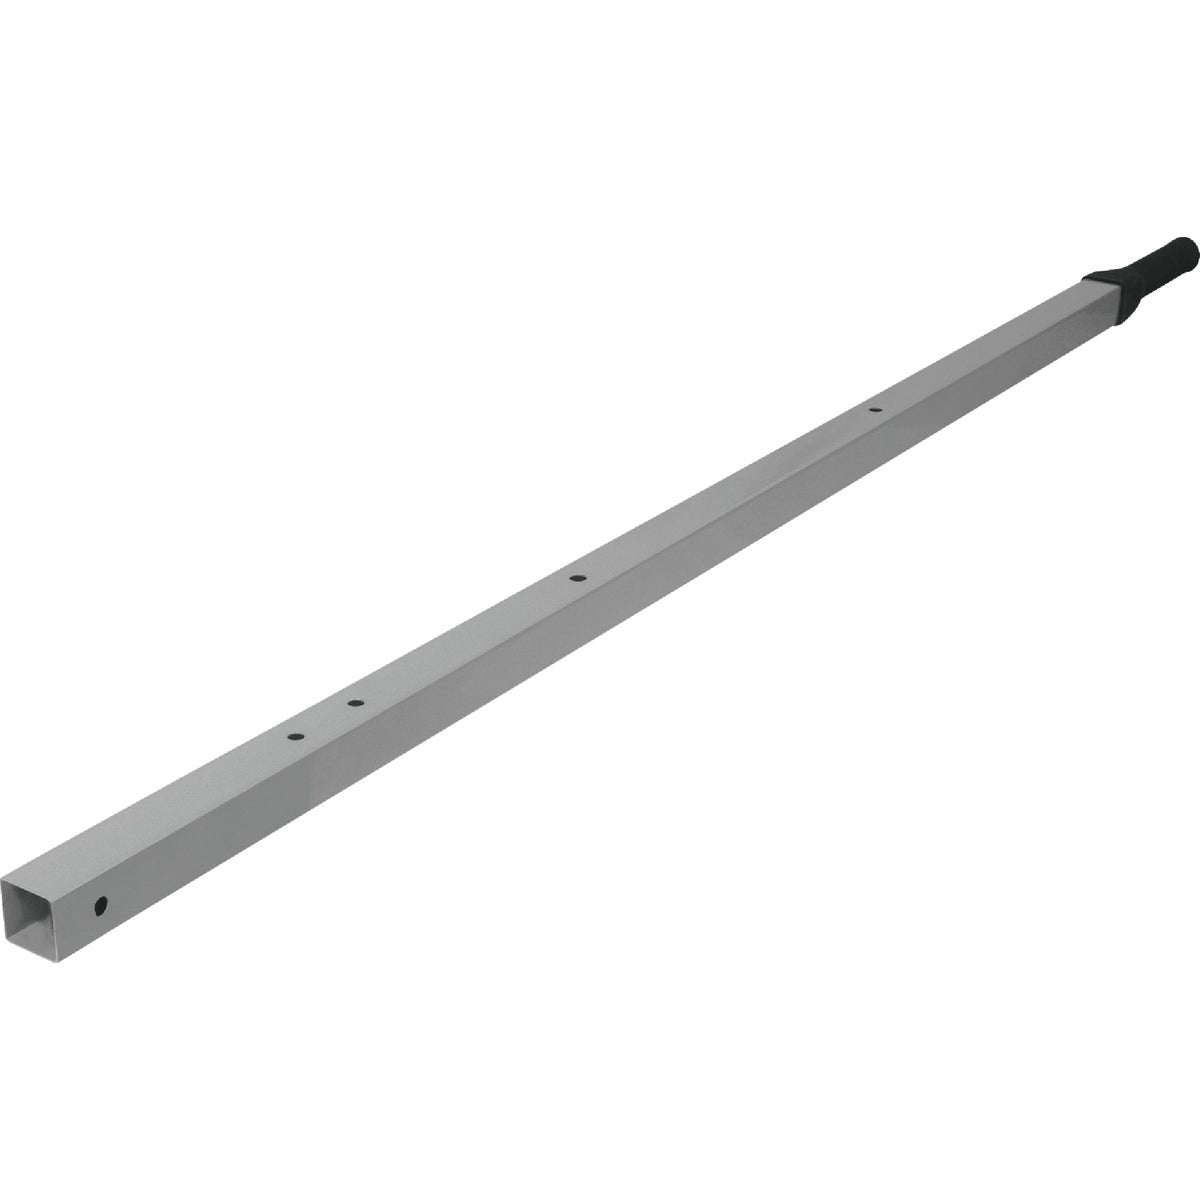 Item 765831, 1-1/2 In. x 60 In. drilled, steel replacement wheelbarrow handle for 6 cu.